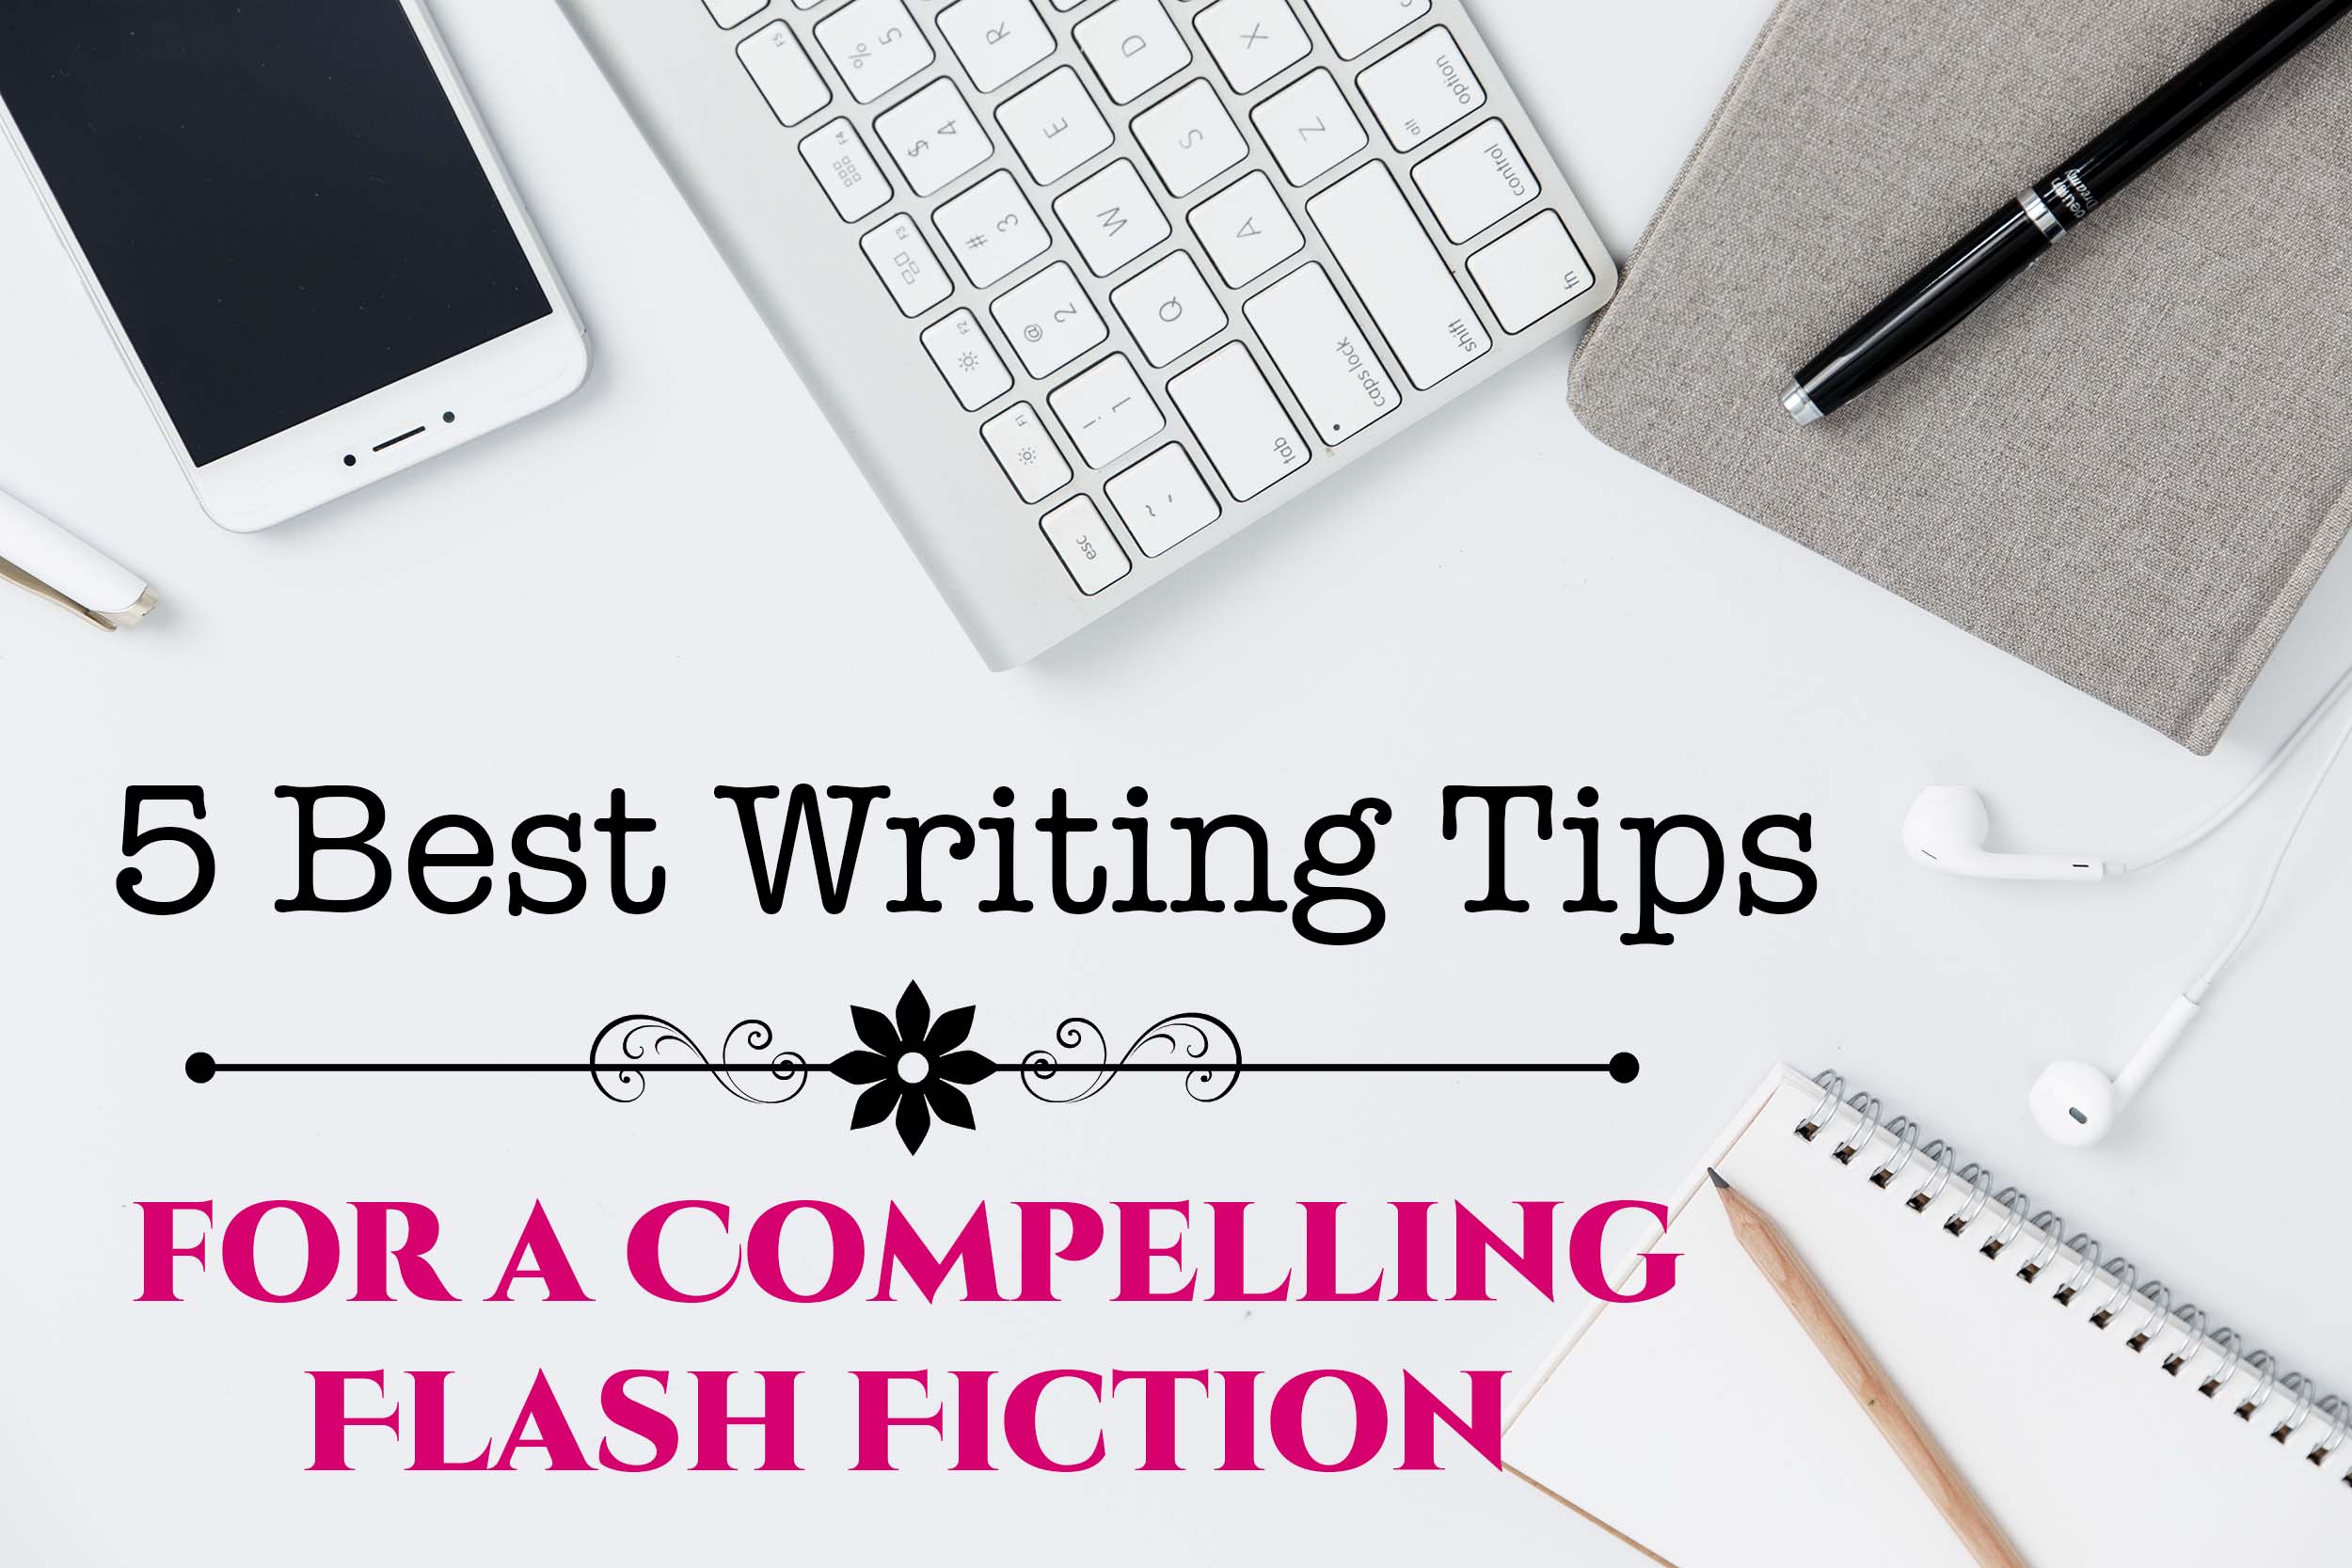 5 Best Writing Tips for a Compelling Flash Fiction